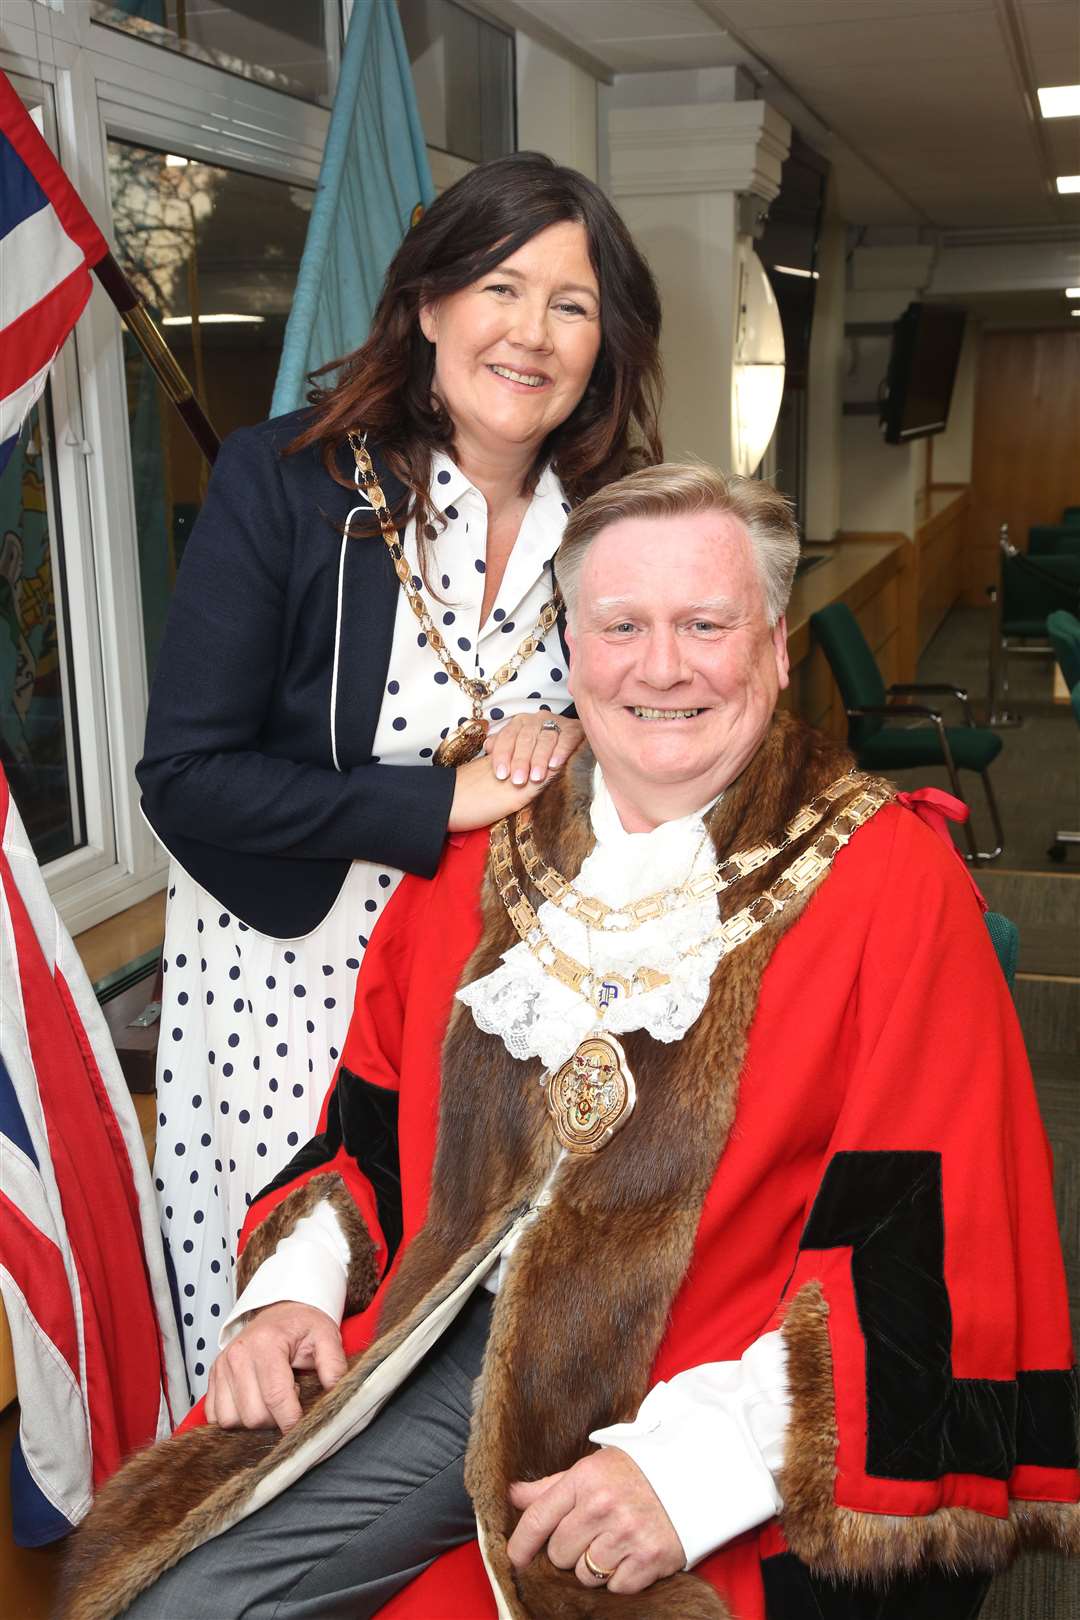 Mayor of Dartford, Cllr Paul Cutler with his wife Suzanne, the Mayoress. Picture: Andy Barnes